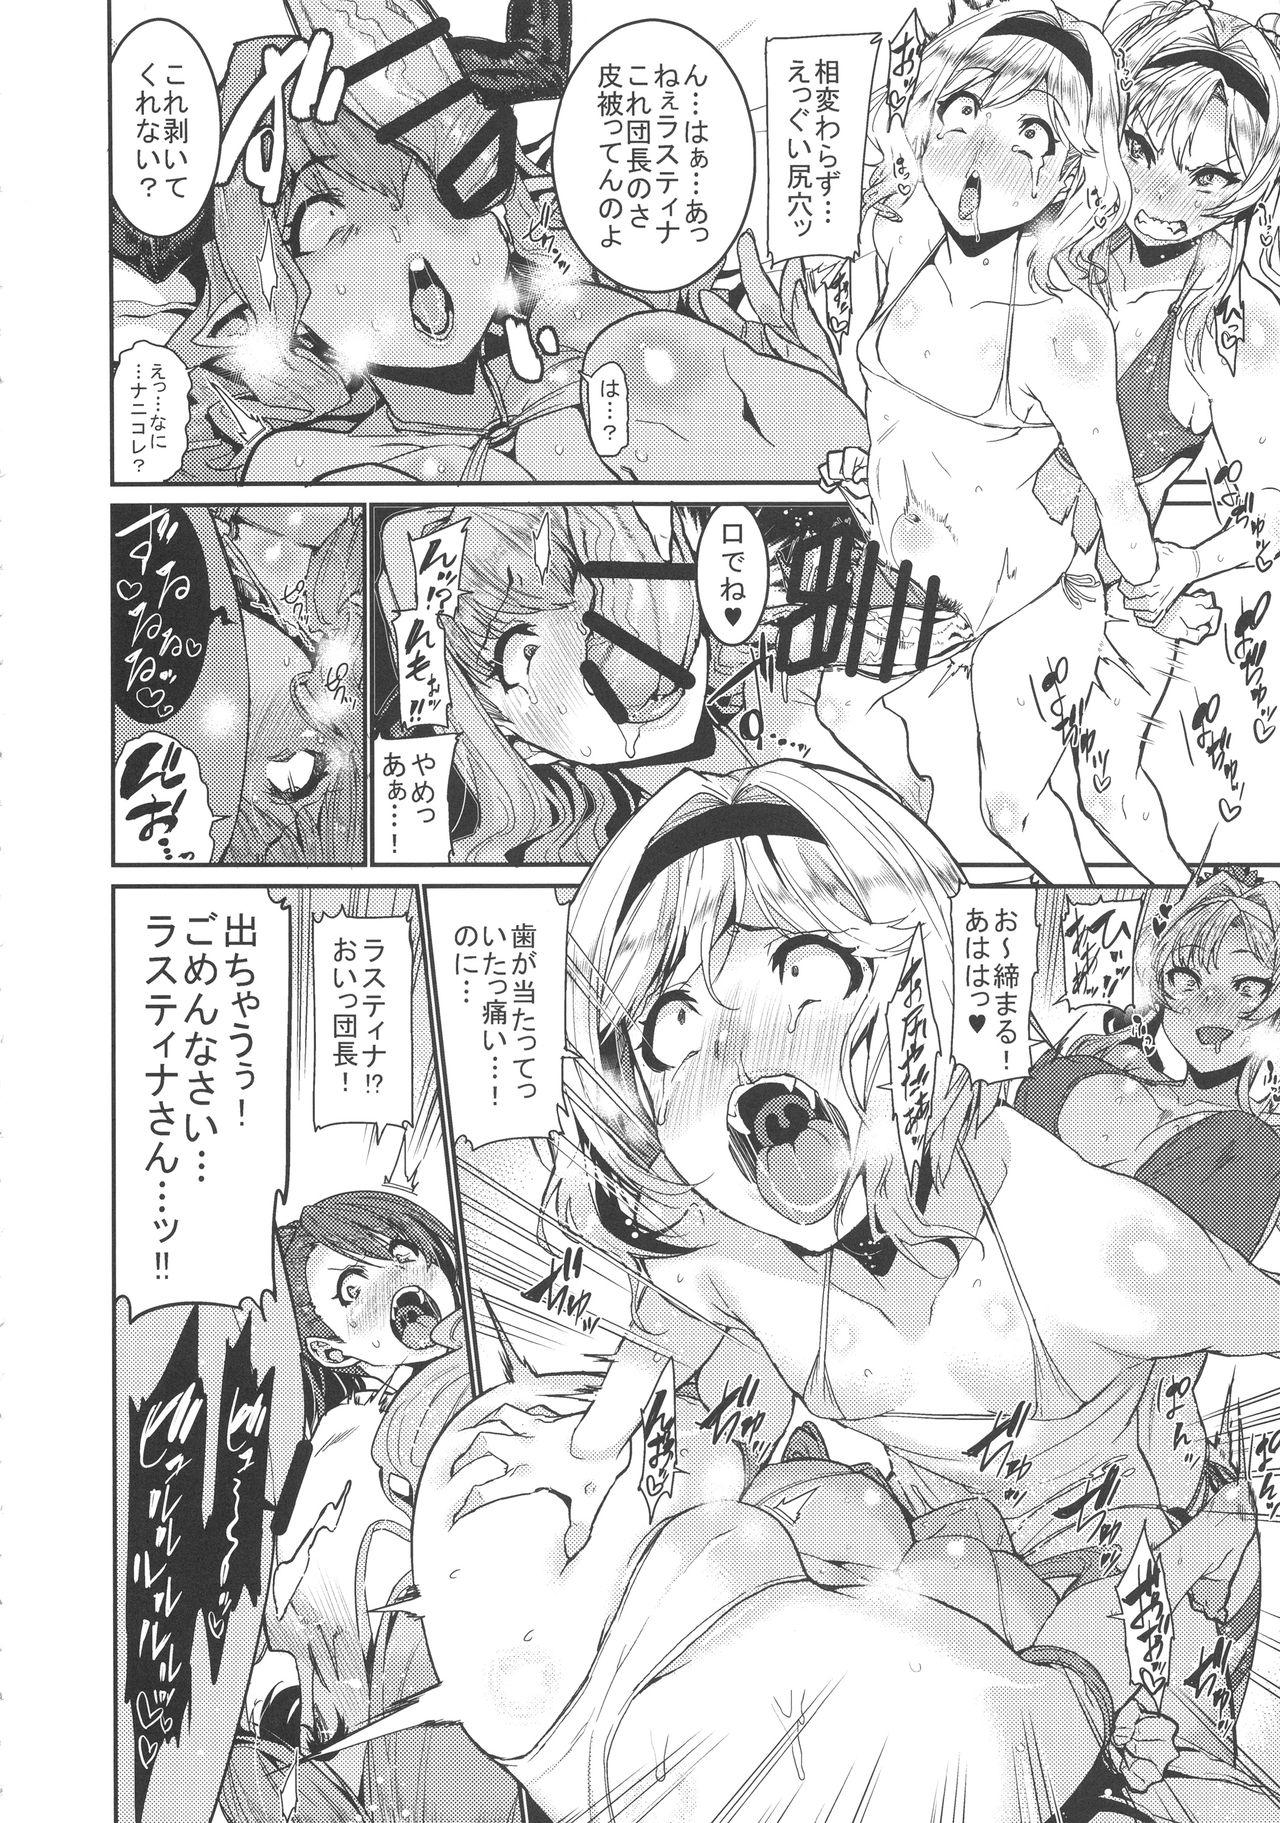 Porn Blow Jobs Be covered, be smeared - Granblue fantasy Top - Page 12